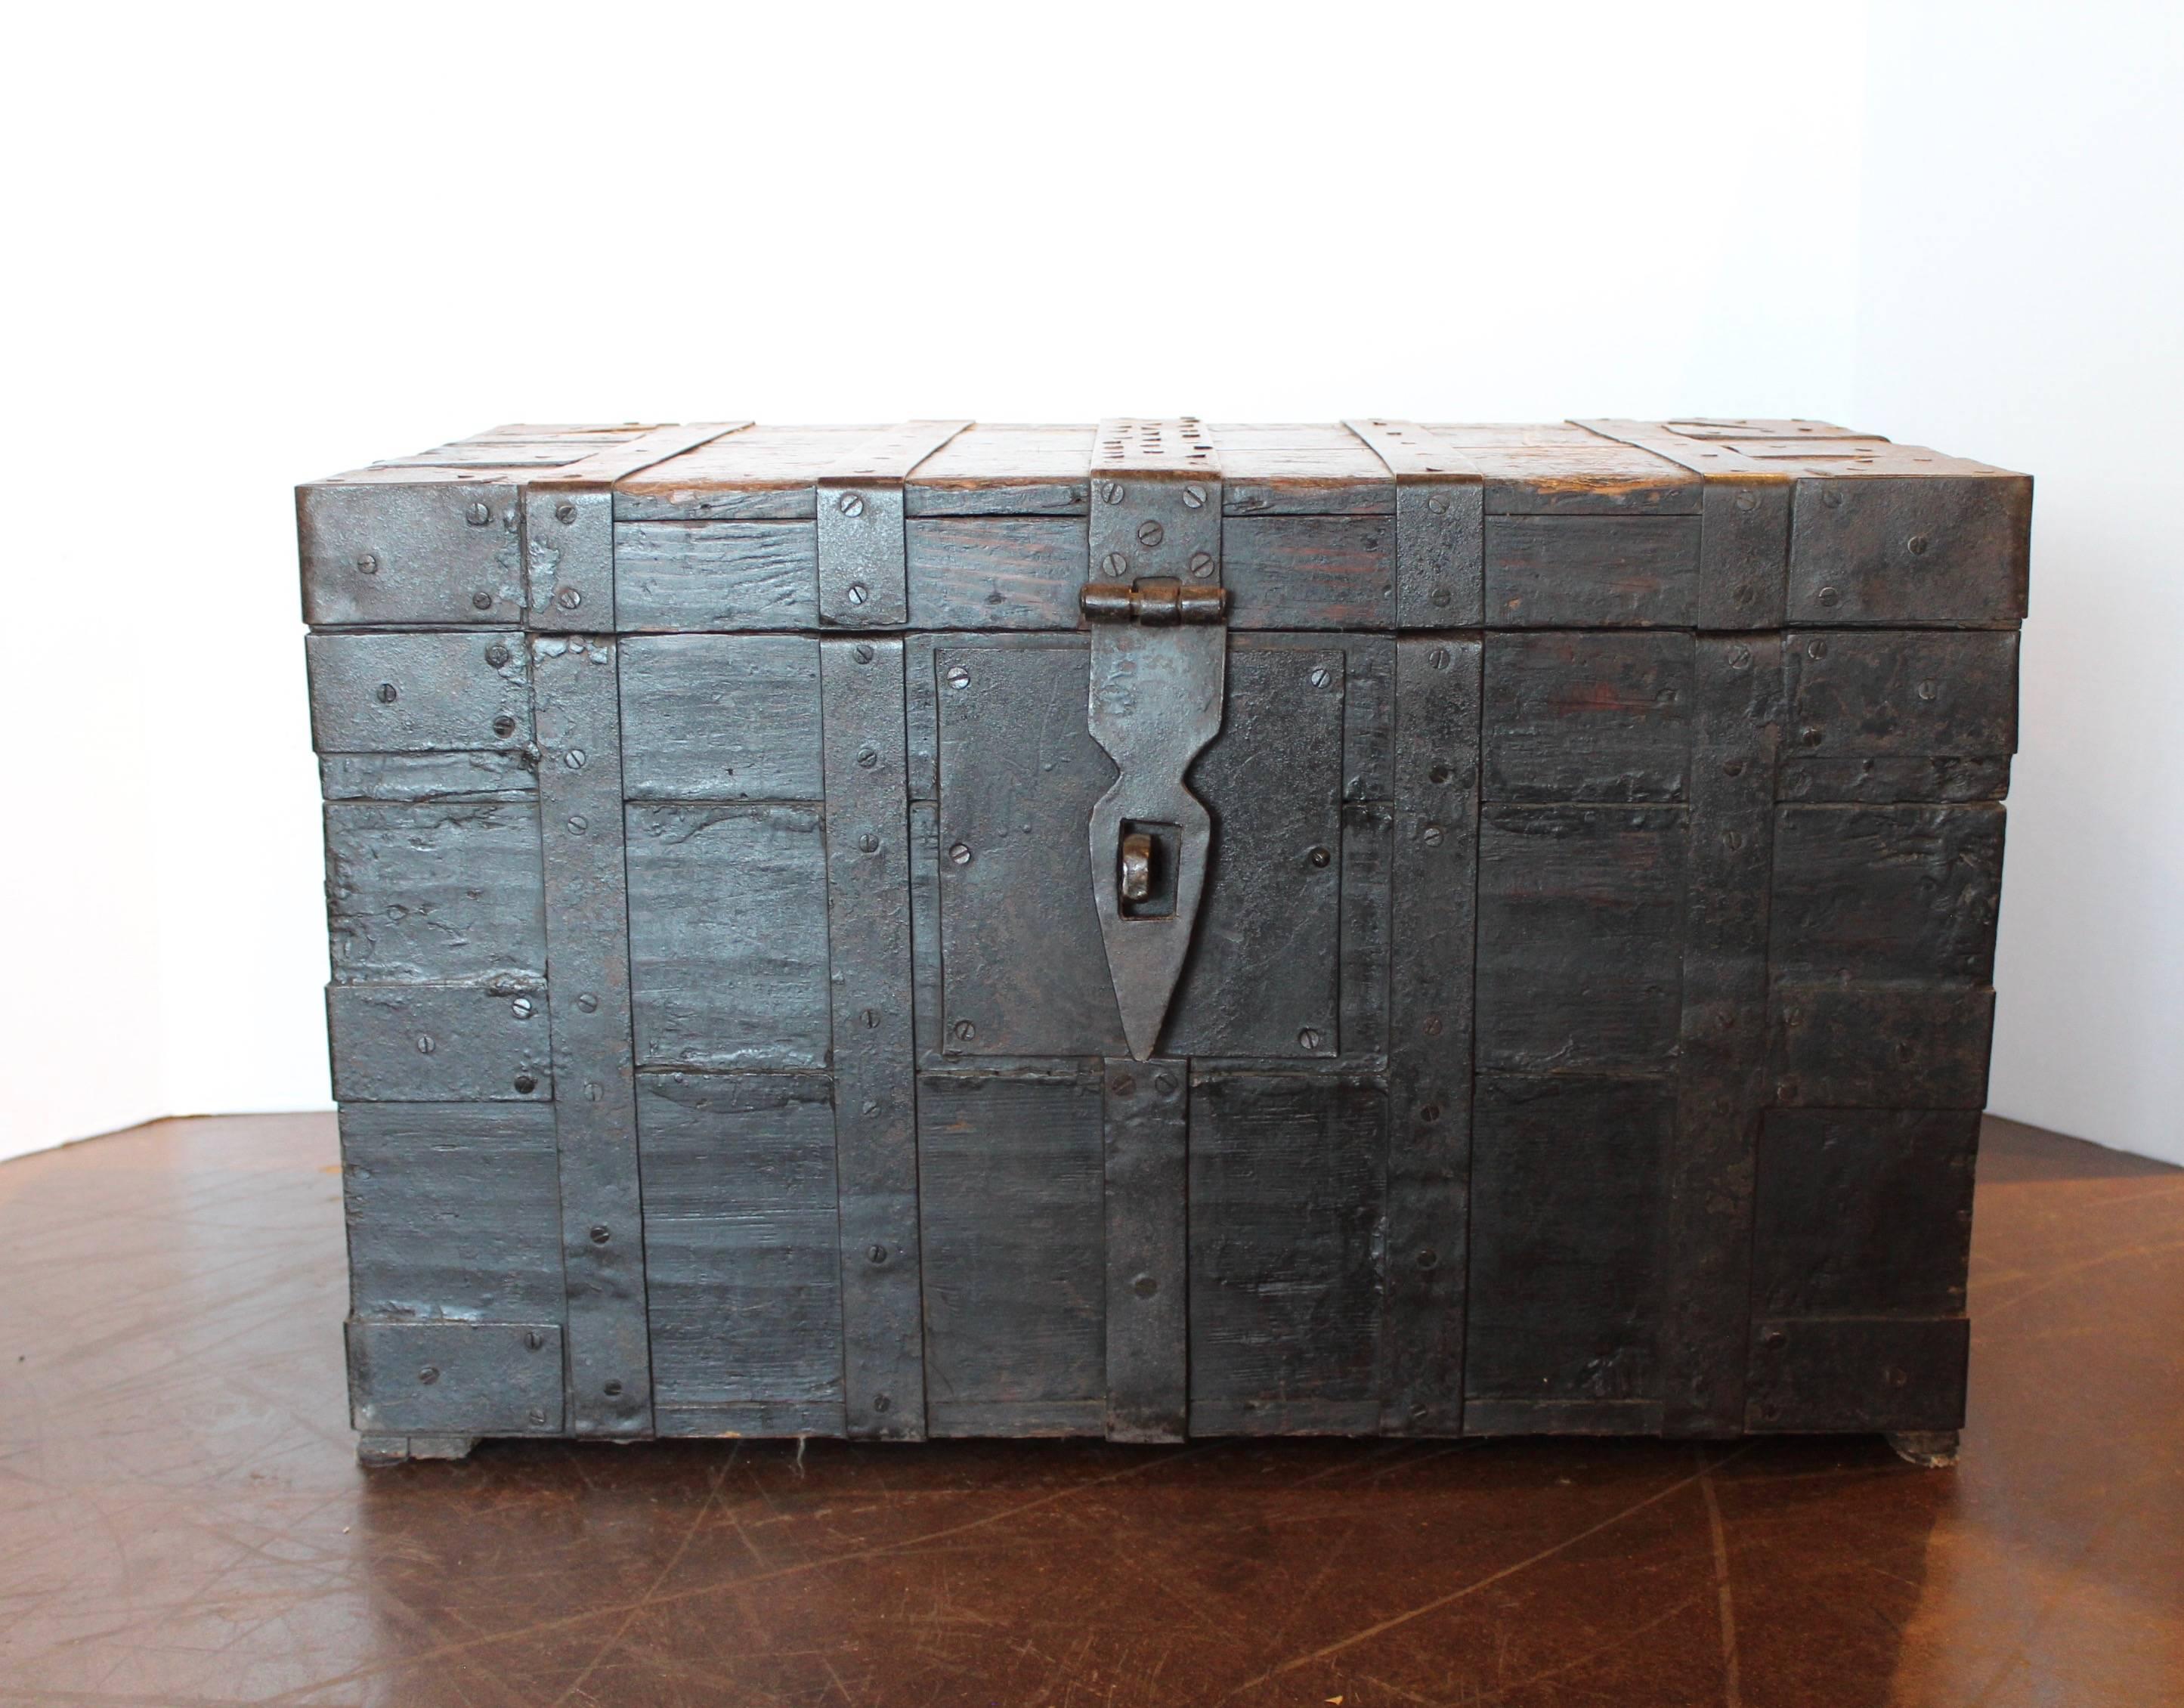 Antique Belgium wood trunk with cast iron, 1890.
Detailed rivet cast iron bolts on patinated steel stripes with dark brown wood.
Cast iron handles on the sides.
Detailed lock hardware in the front.
Storage box space, interior measurements: 14